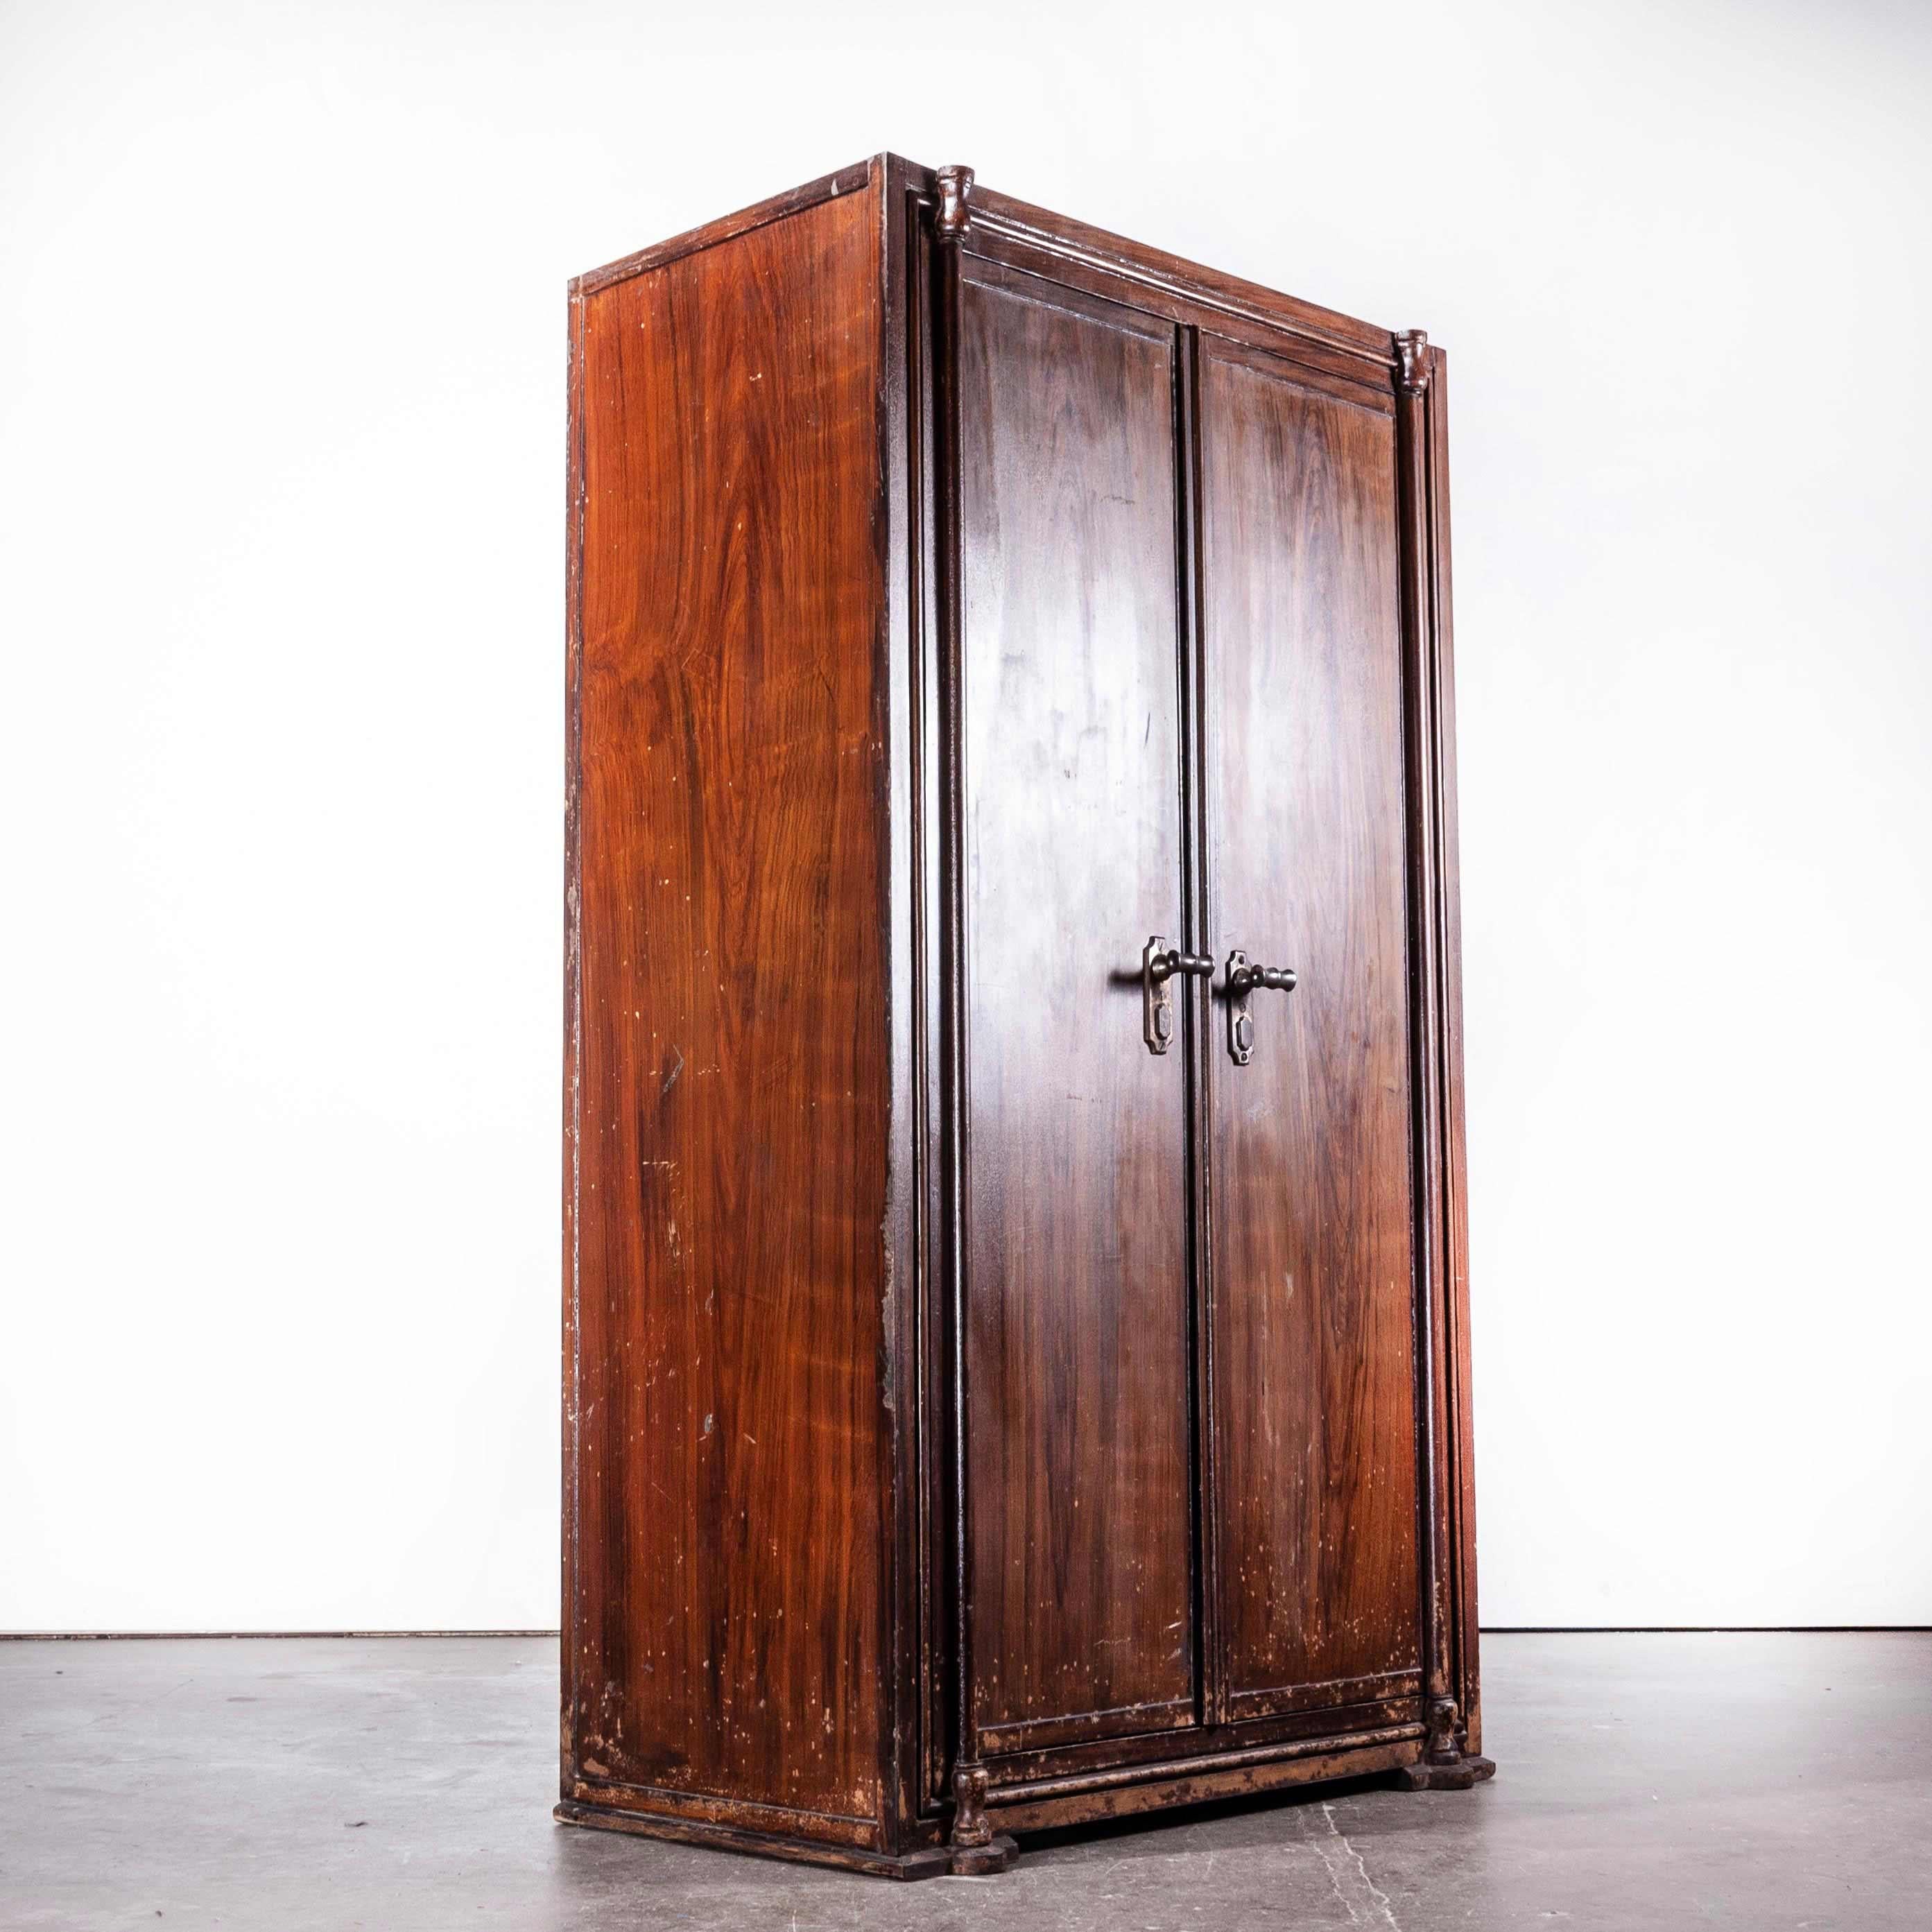 1890s original patented fireproof large cabinet by Tanczos Of Vienna
1890s original patented fireproof large security cabinet by R Tanczos of Vienna. One of our most favourite finds ever. A large exceptionally original fireproof cabinet sourced